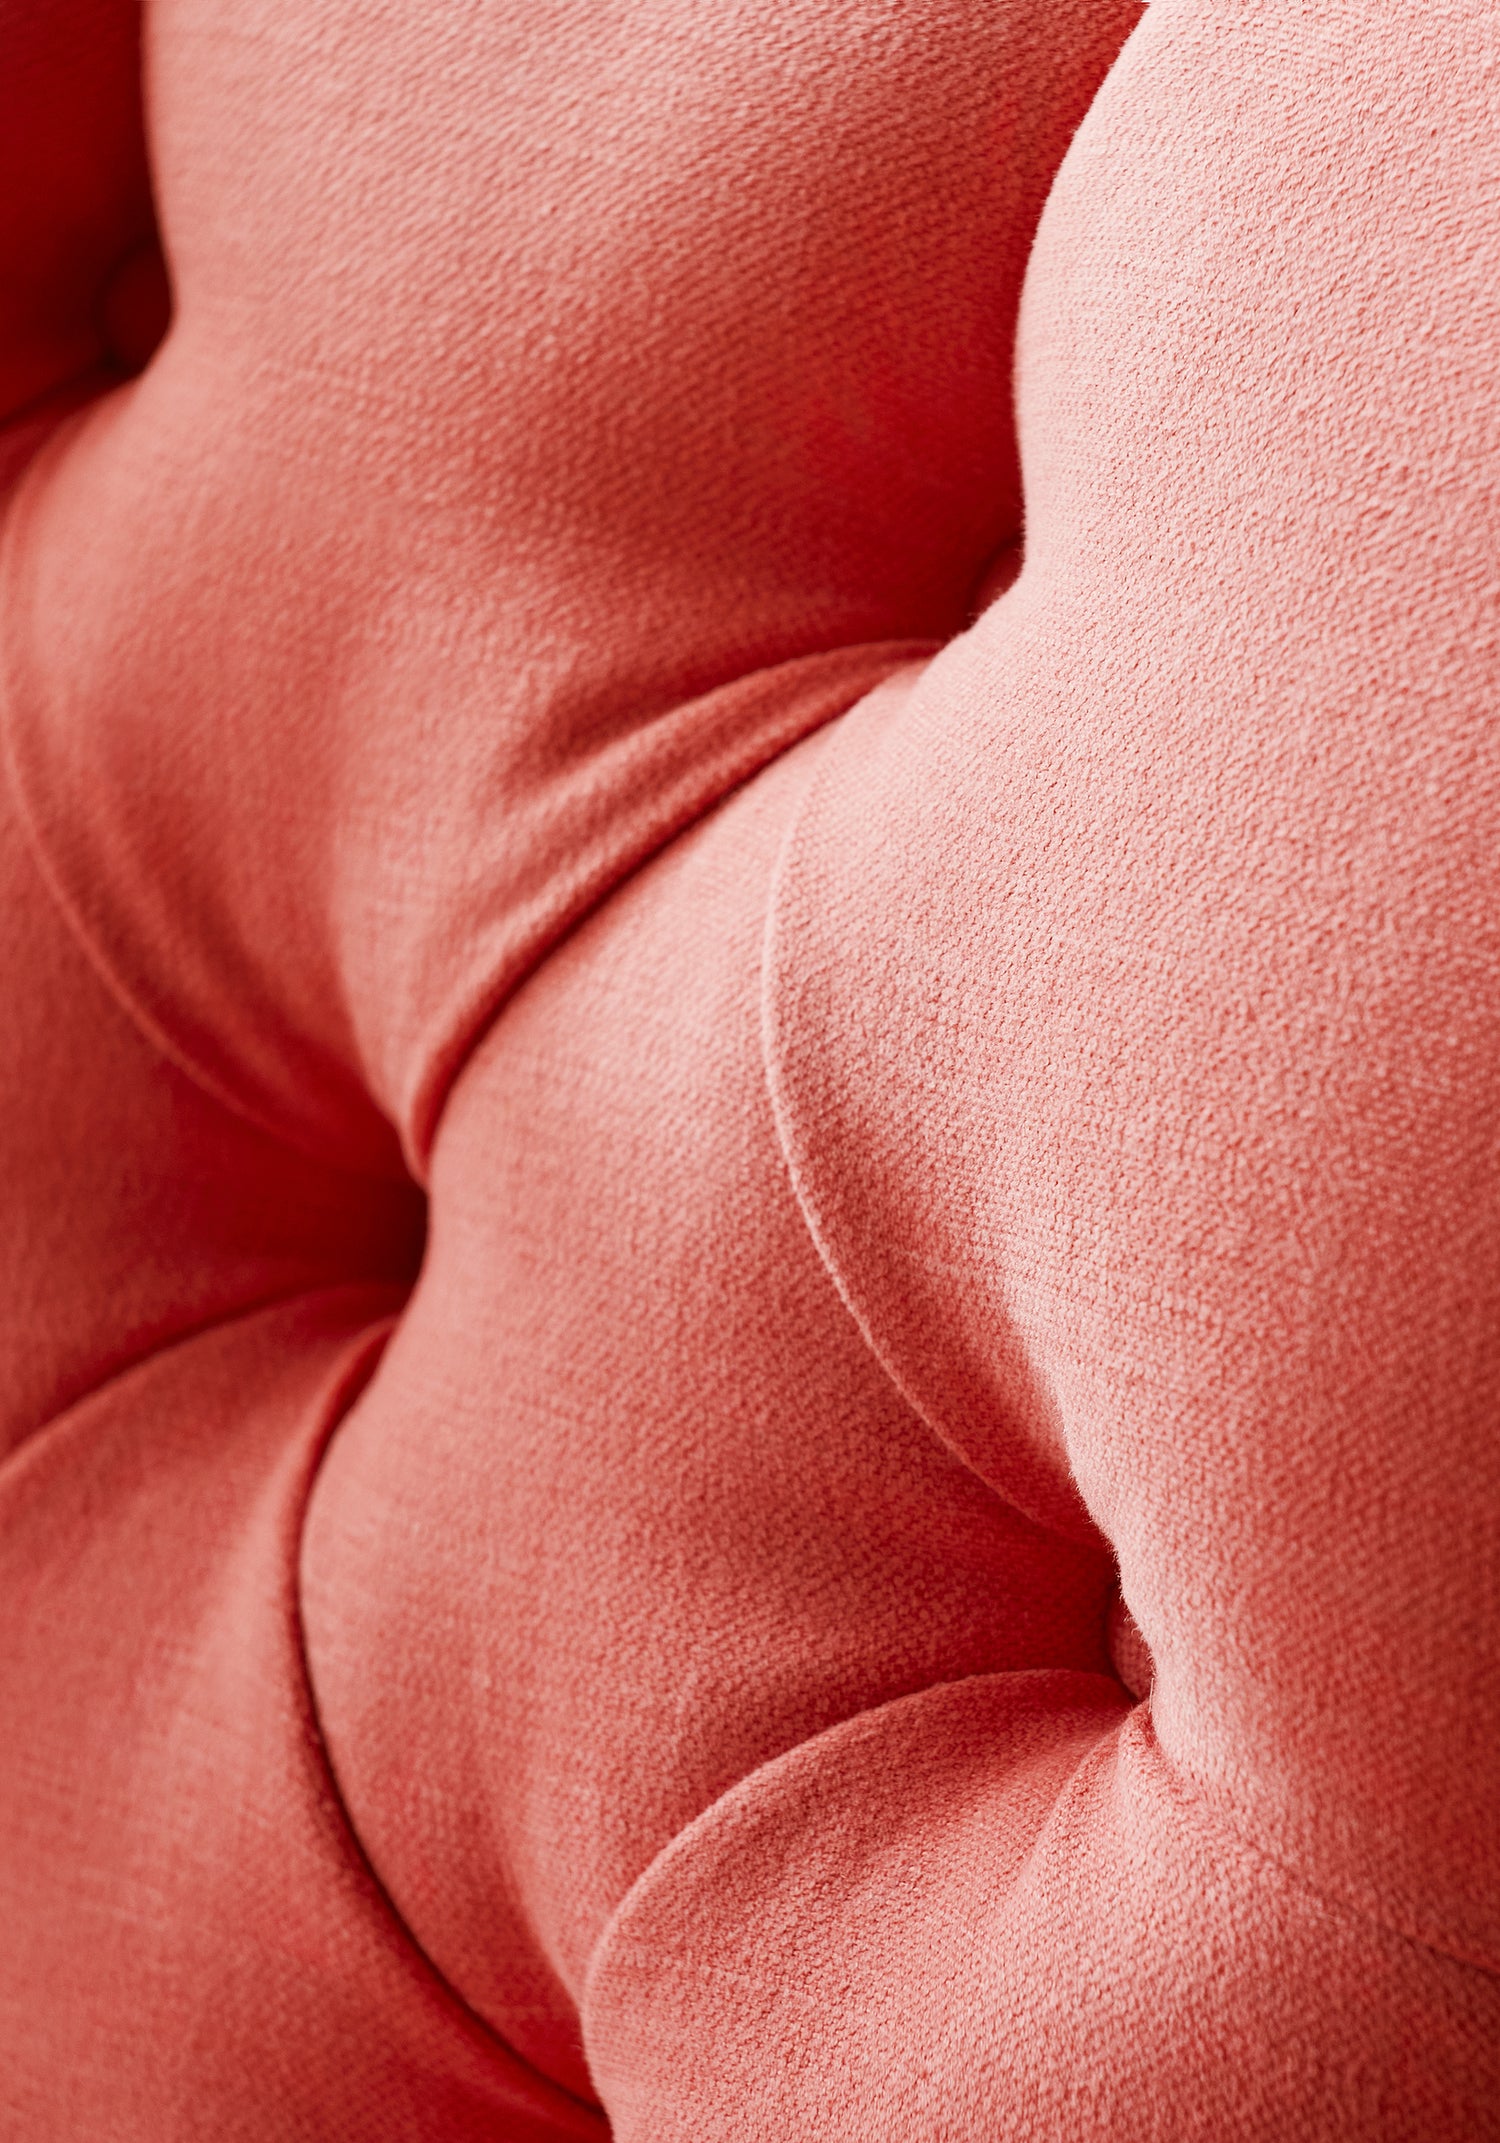 Detail of Middleton Chair in Prisma woven fabric in coral color of the Woven Resource Vol 12 Prisma collection by Thibaut - pattern number W70126